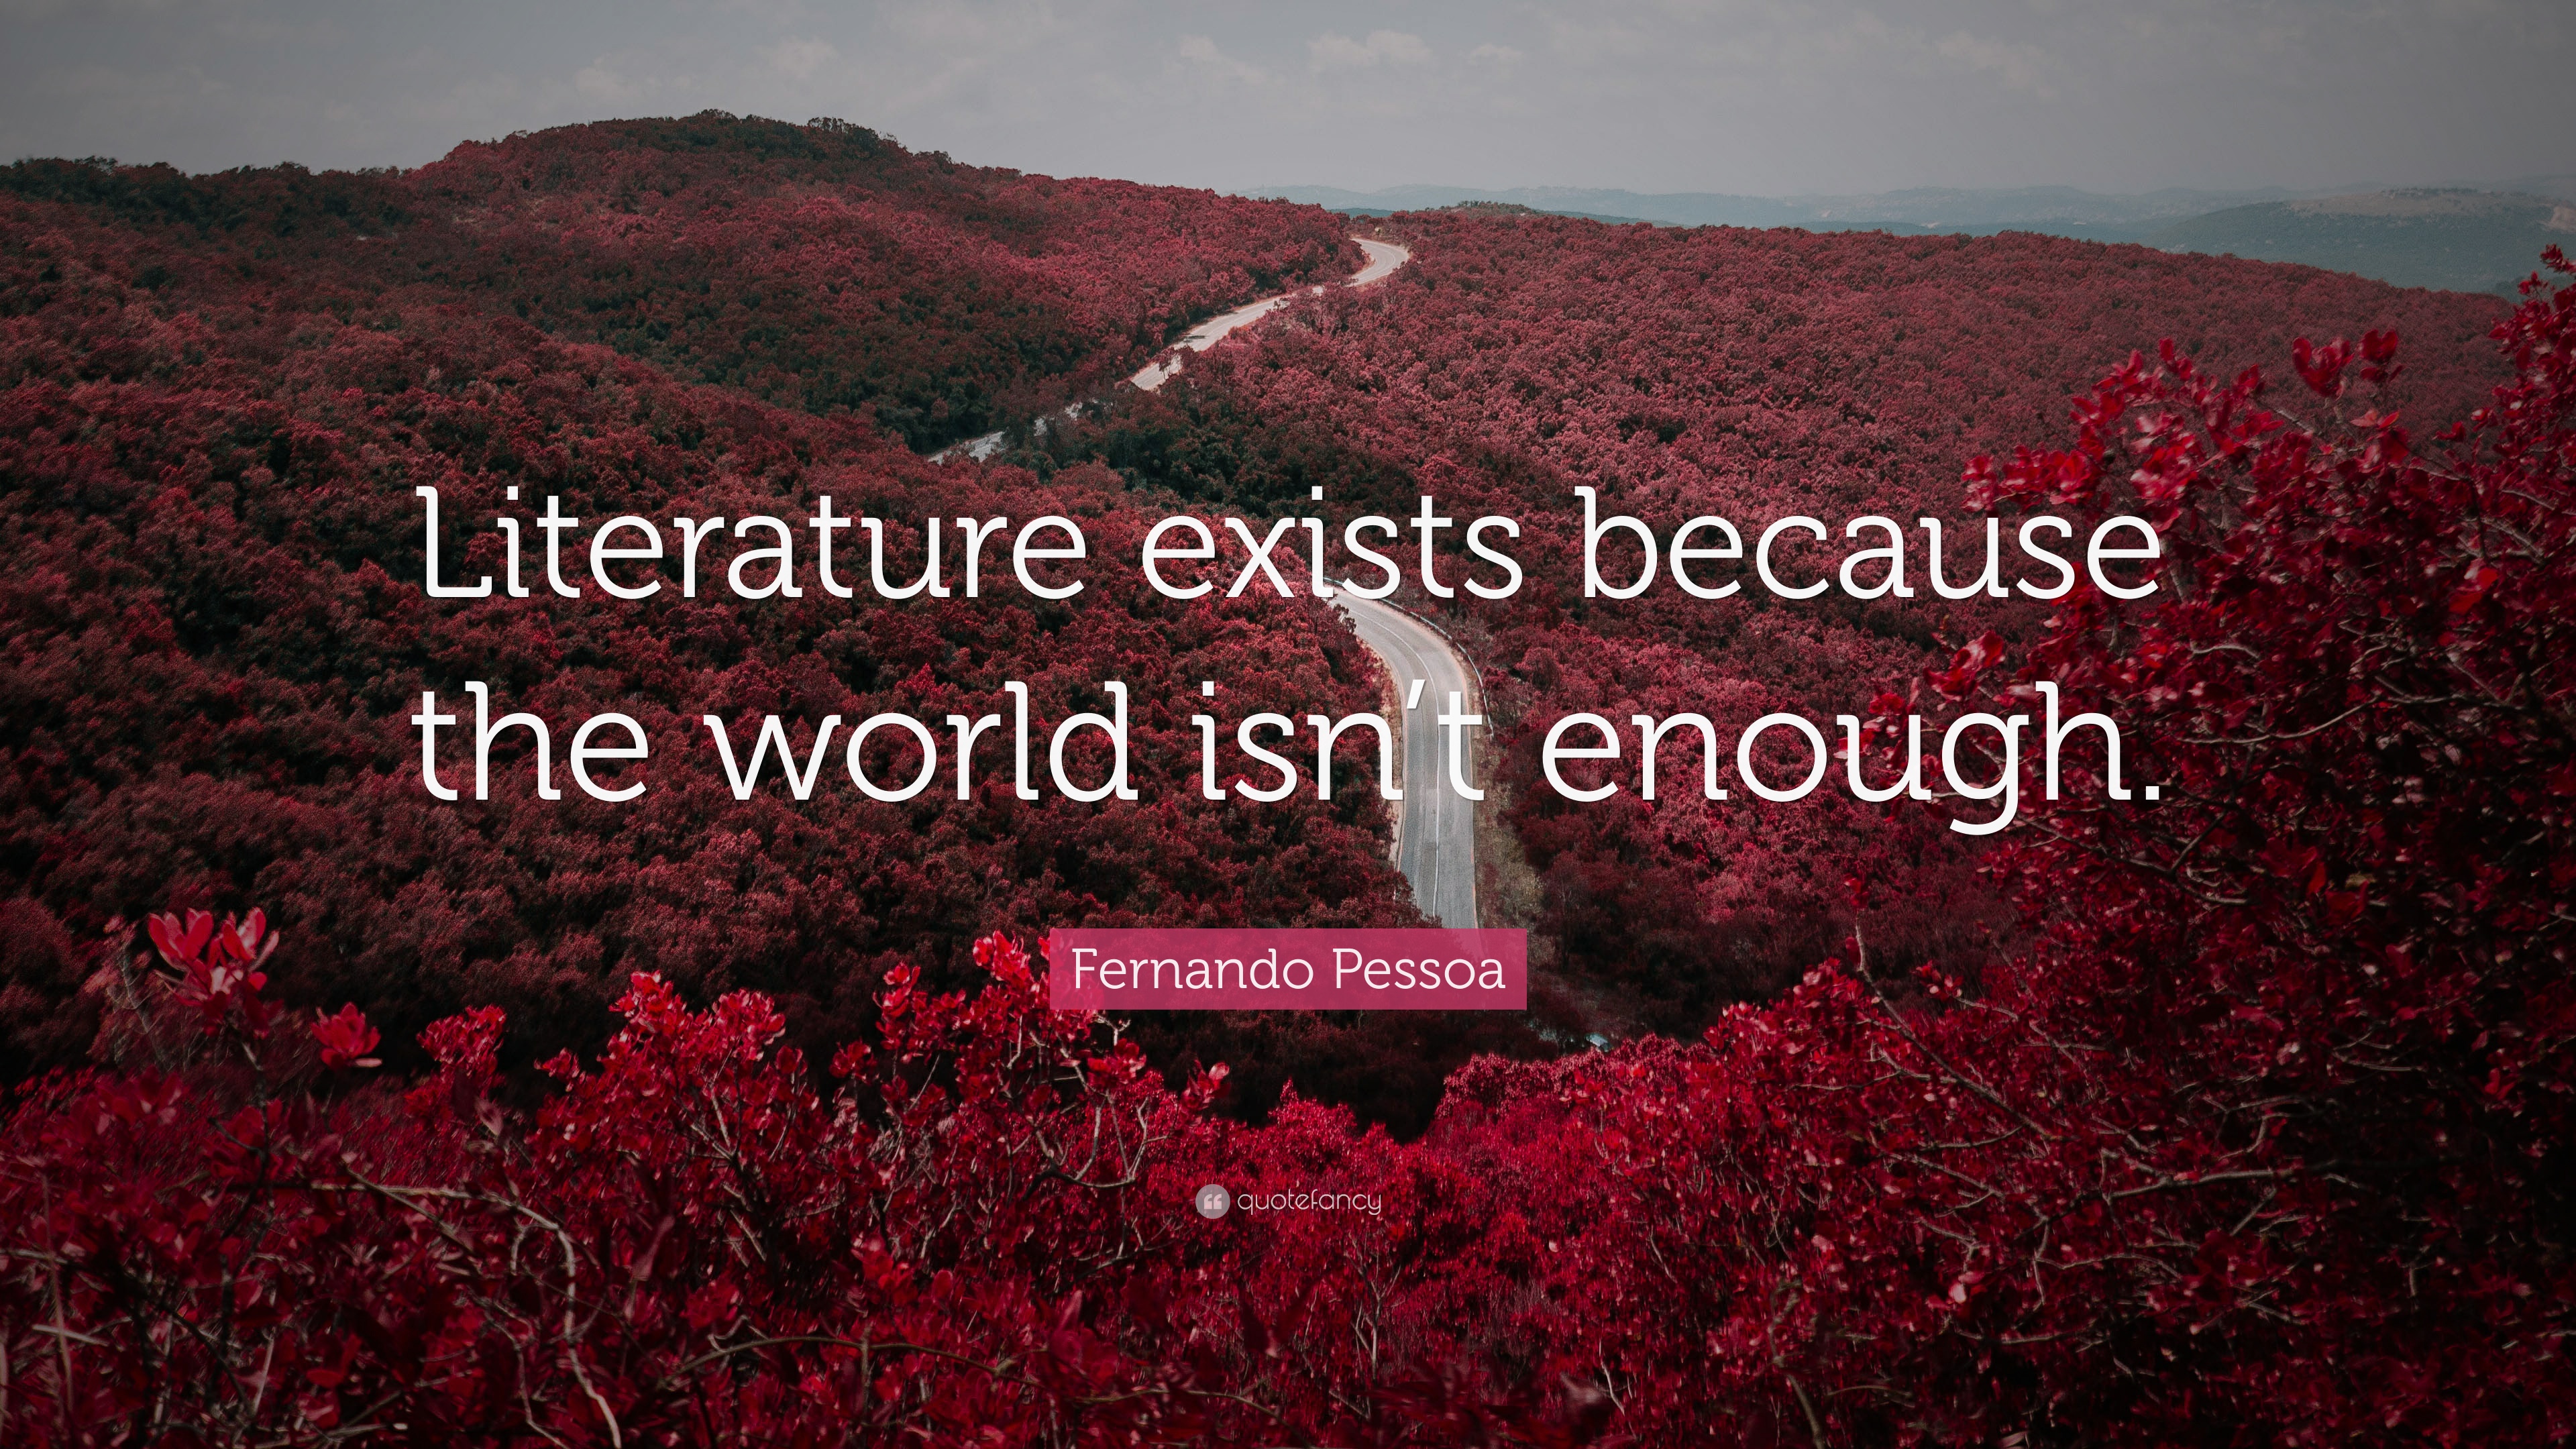 Fernando Pessoa Quote - Everything In This World Has A Hidden Meaning - HD Wallpaper 